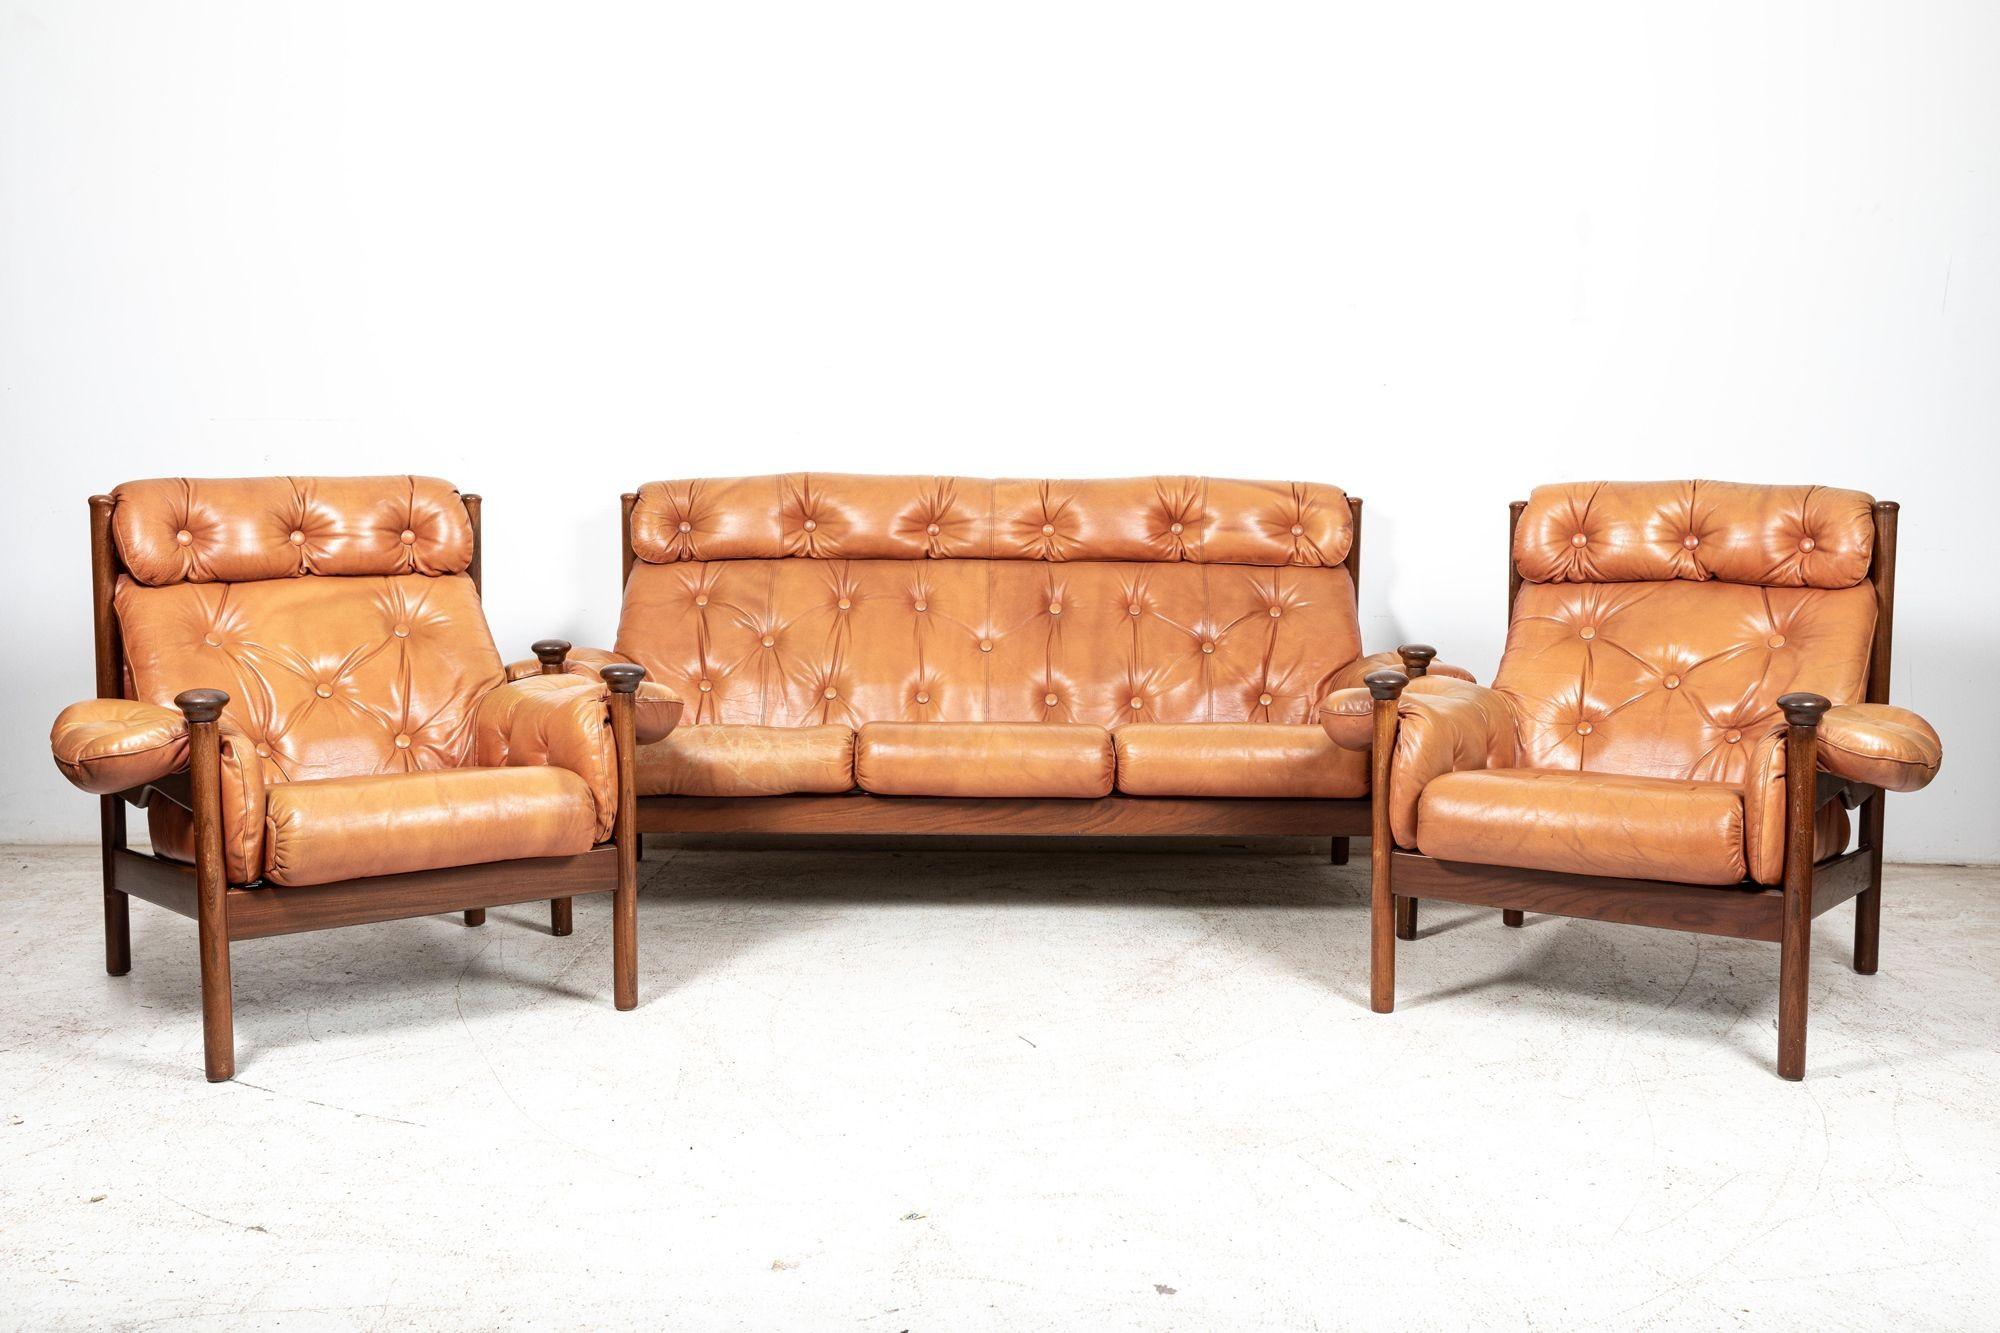 circa 1960

Mid 20thC Guy Rogers ‘Santa Fe’ Sofa Suite in Cognac Leather. Extremely comfortable button-backed leather cushions on a solid teak frame.

Designed by Eric Pamphilon and George Fejer for Guy Rogers.

sku 1016

Chairs W96 x D86 x